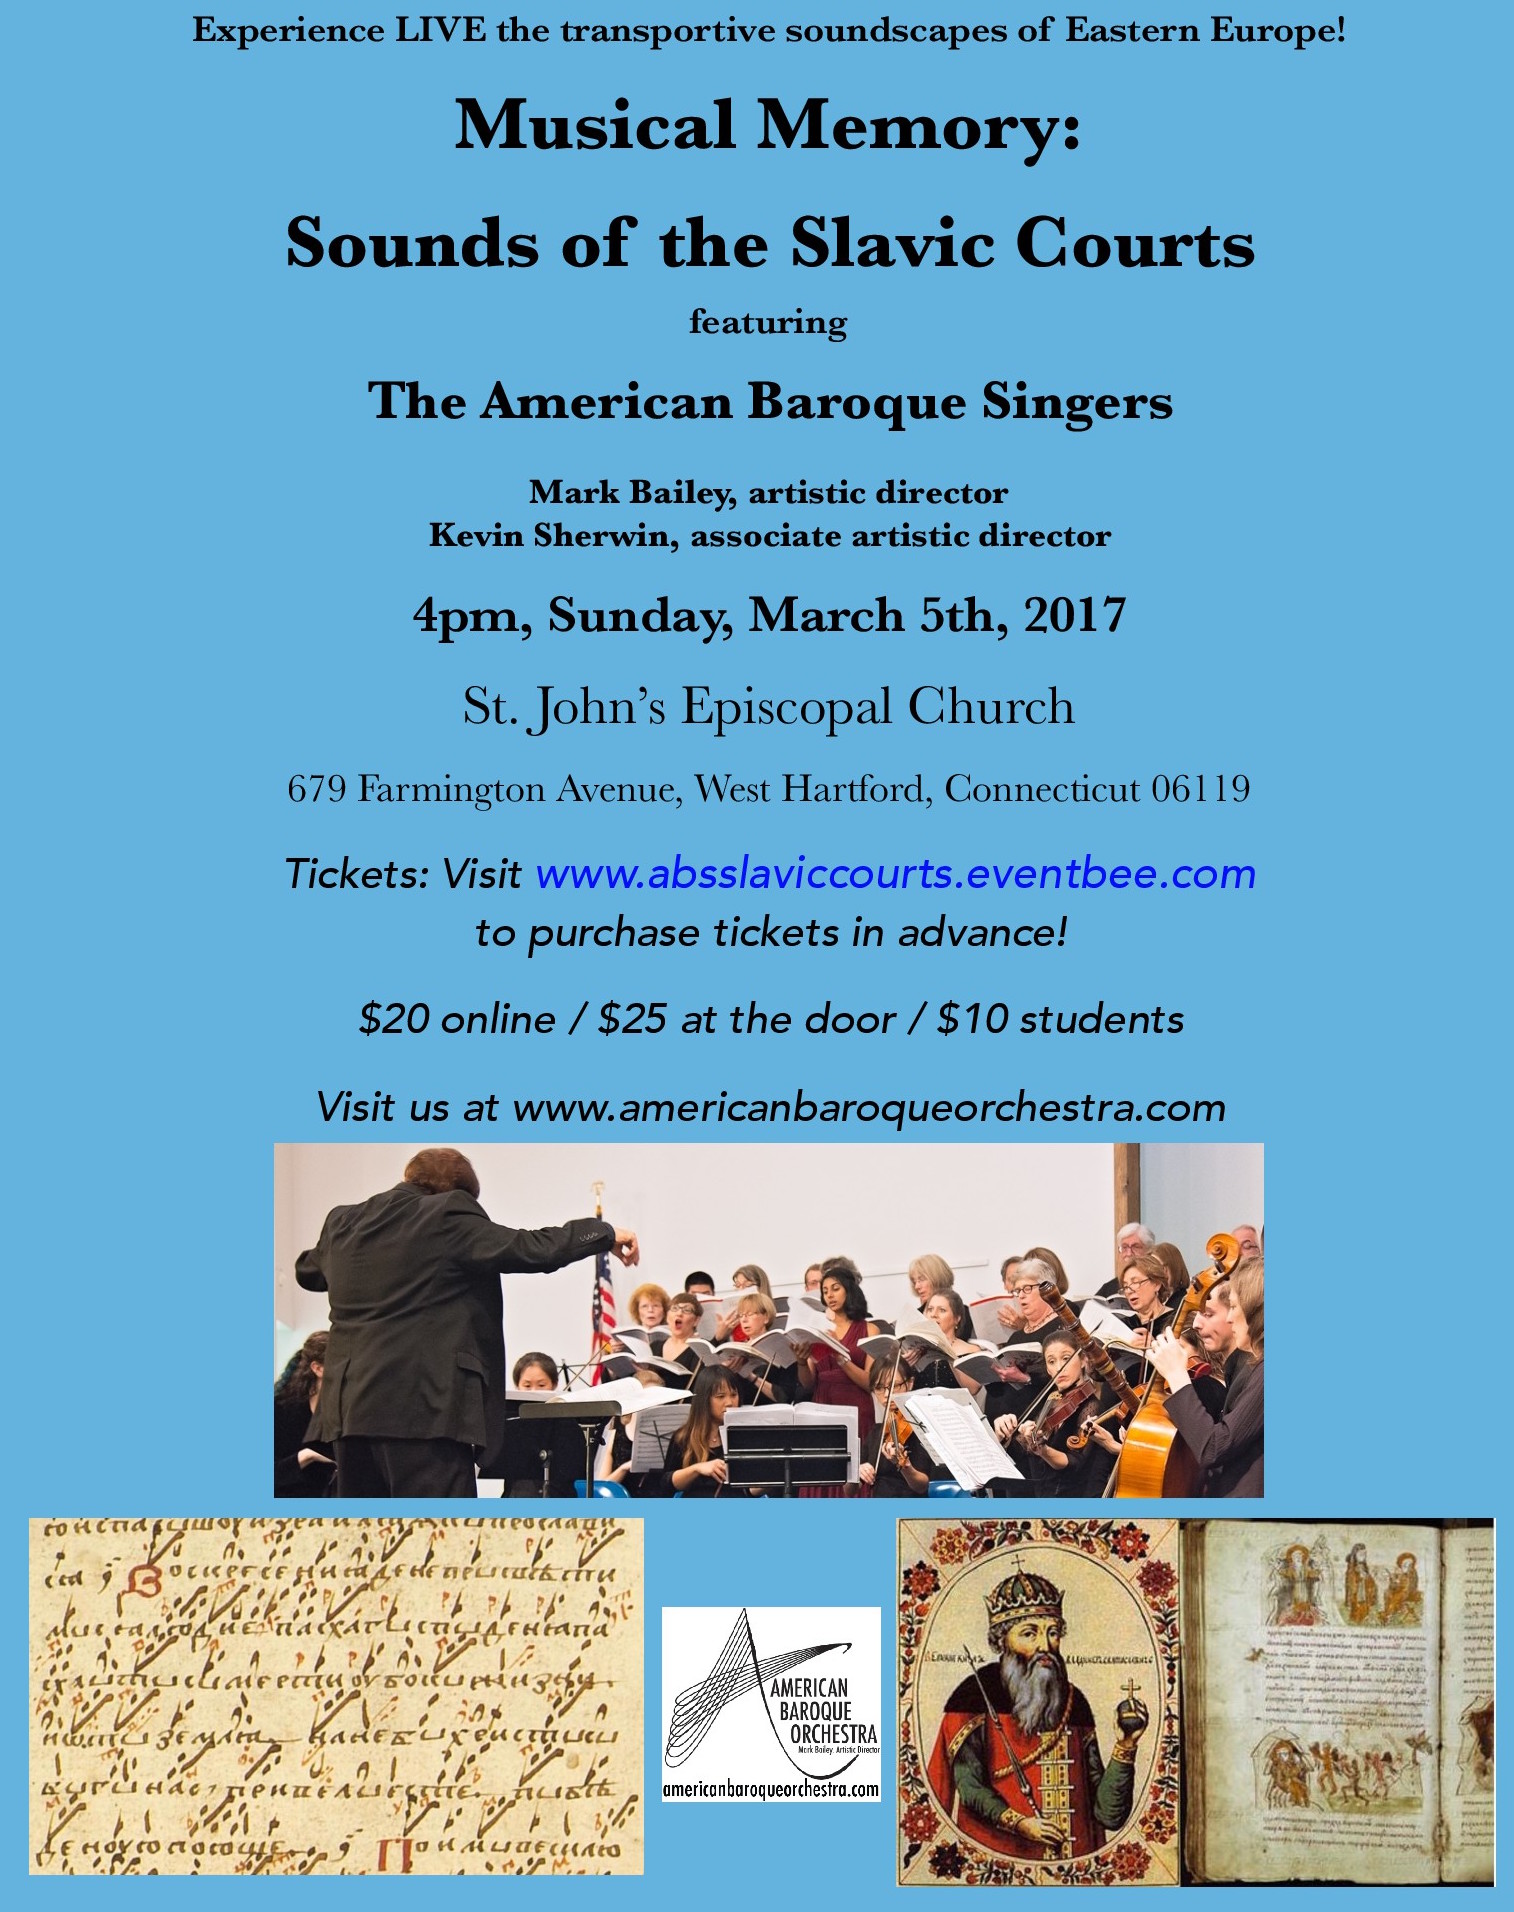 Musical Memory: Sounds of the Slavic Courts